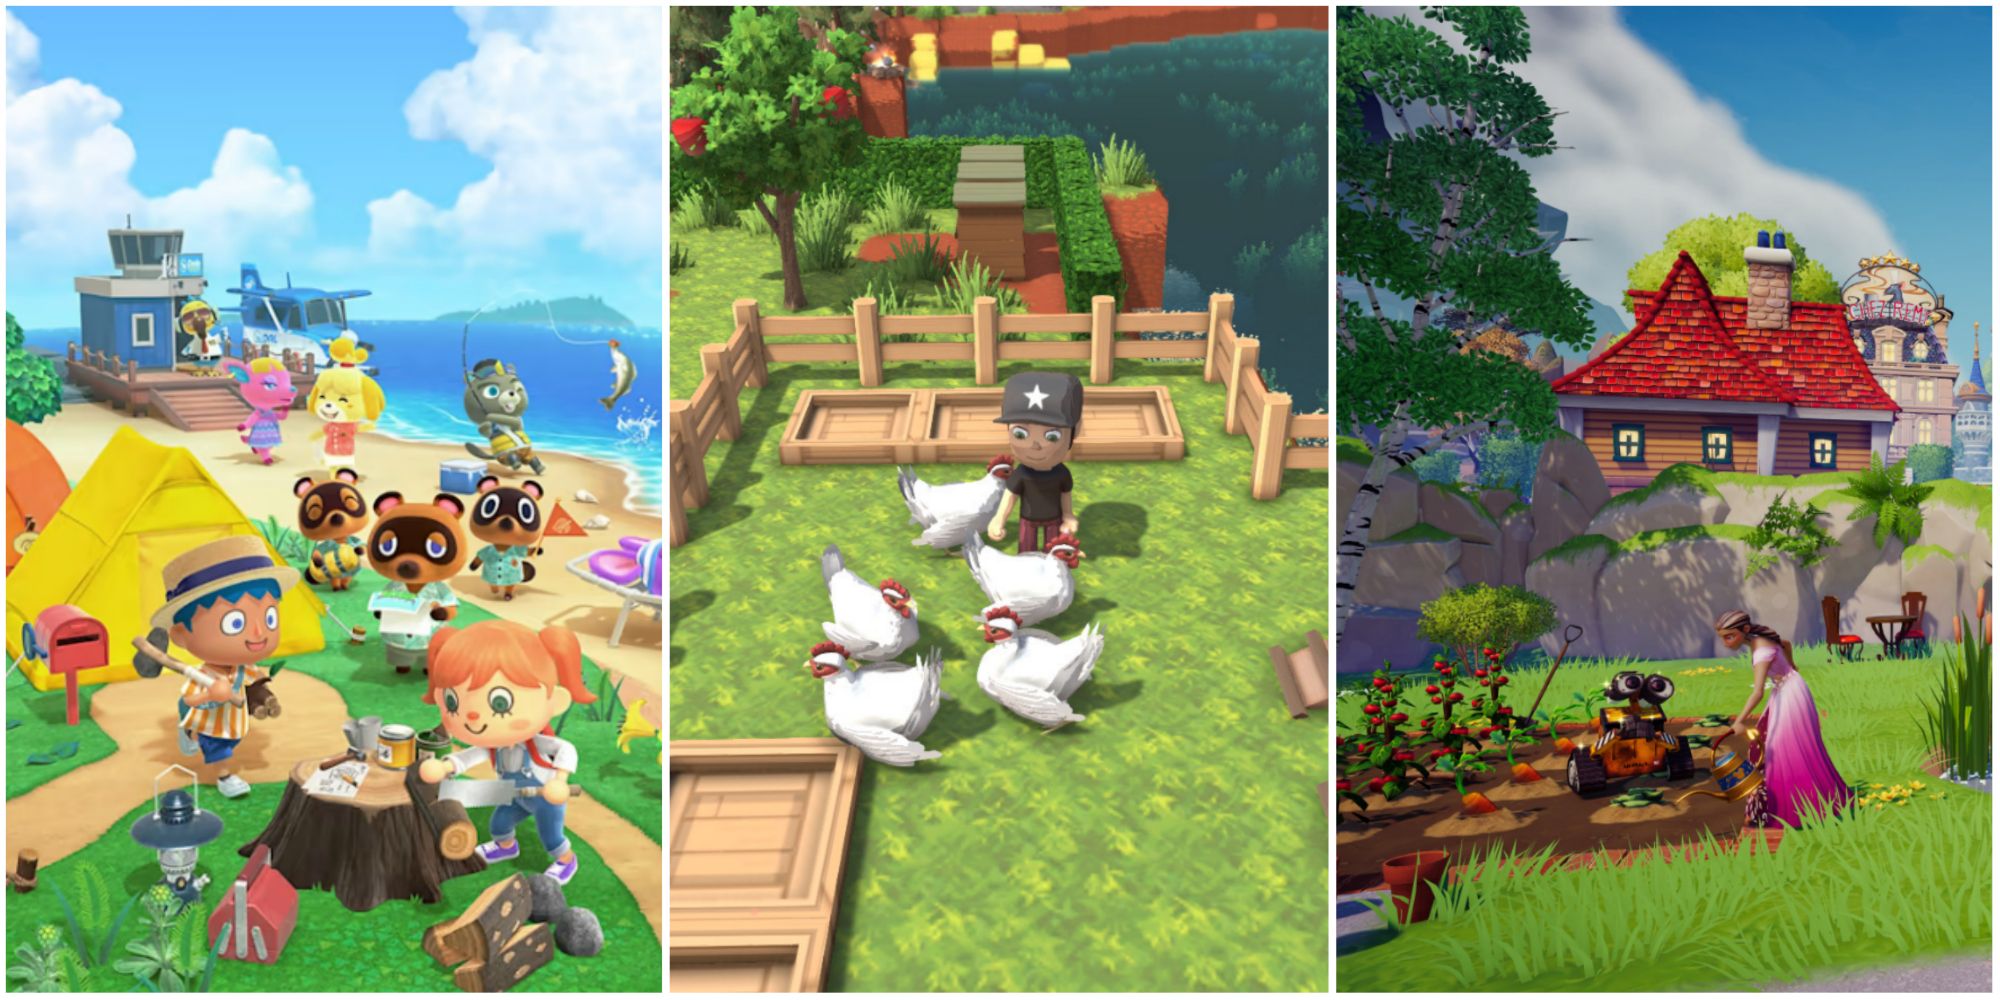 animal crossing new horizons villagers working, dinkum character with chickens, disney dreamlight valley princess farming featured